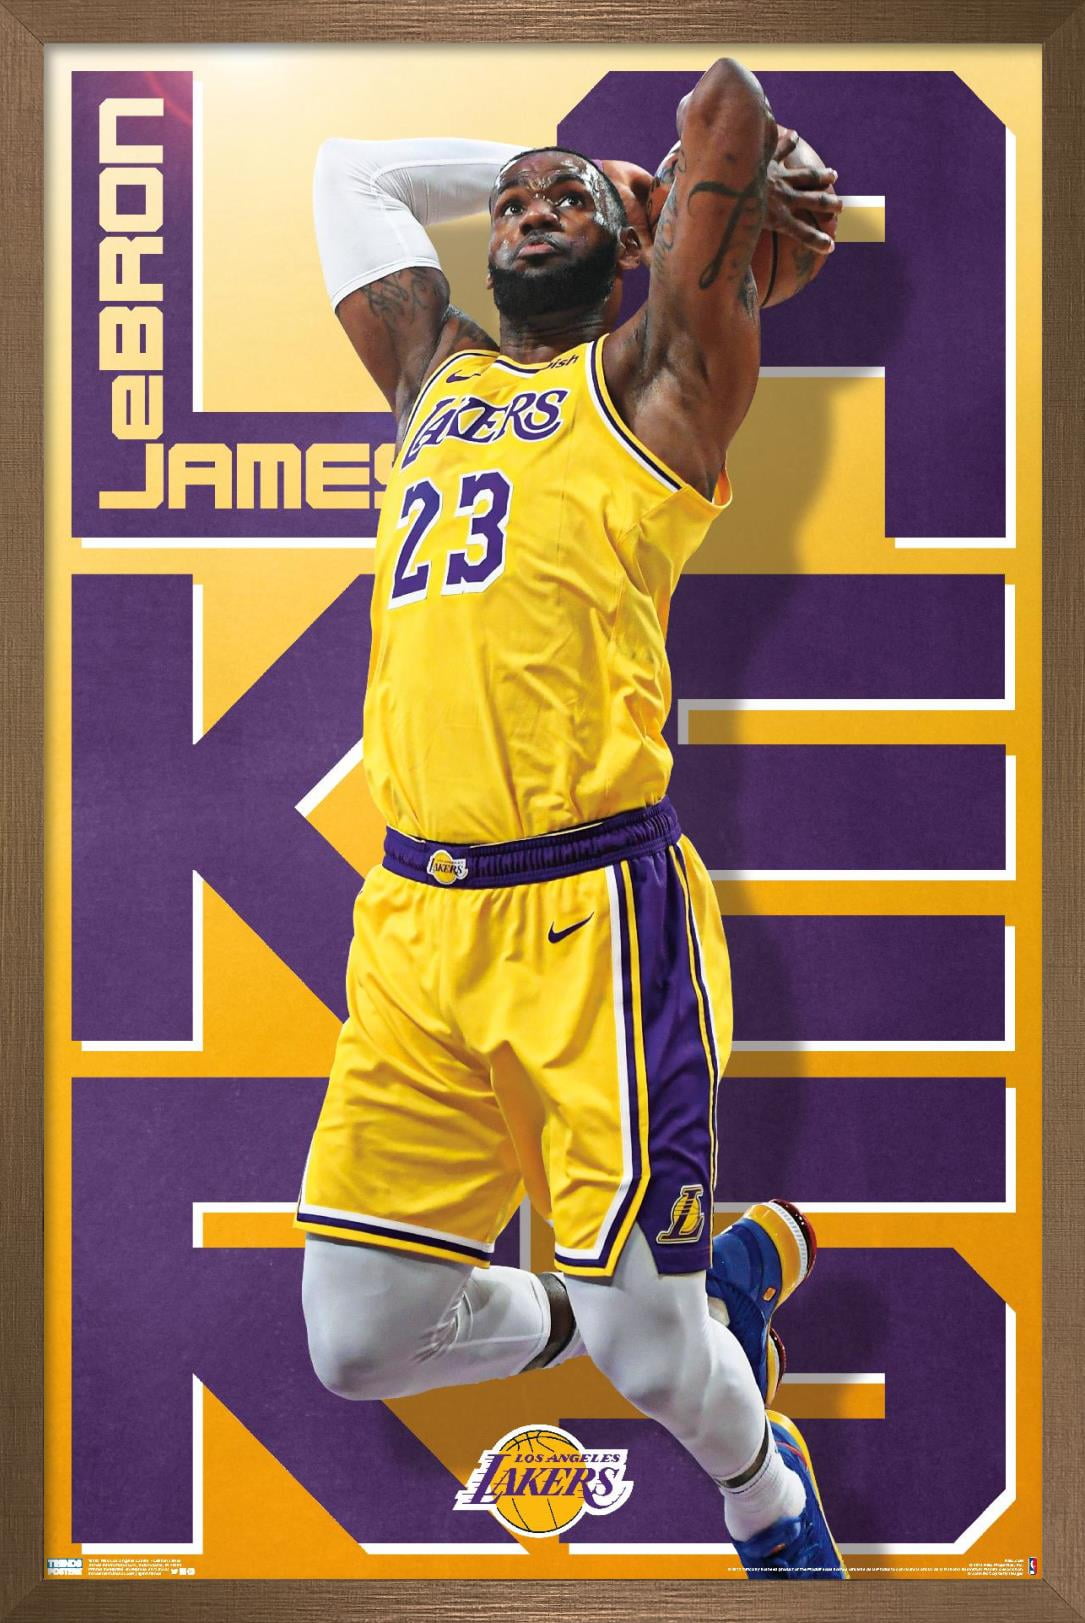 NBA Los Angeles Lakers - LeBron James 20 Wall Poster, 22.375 x 34, Framed  